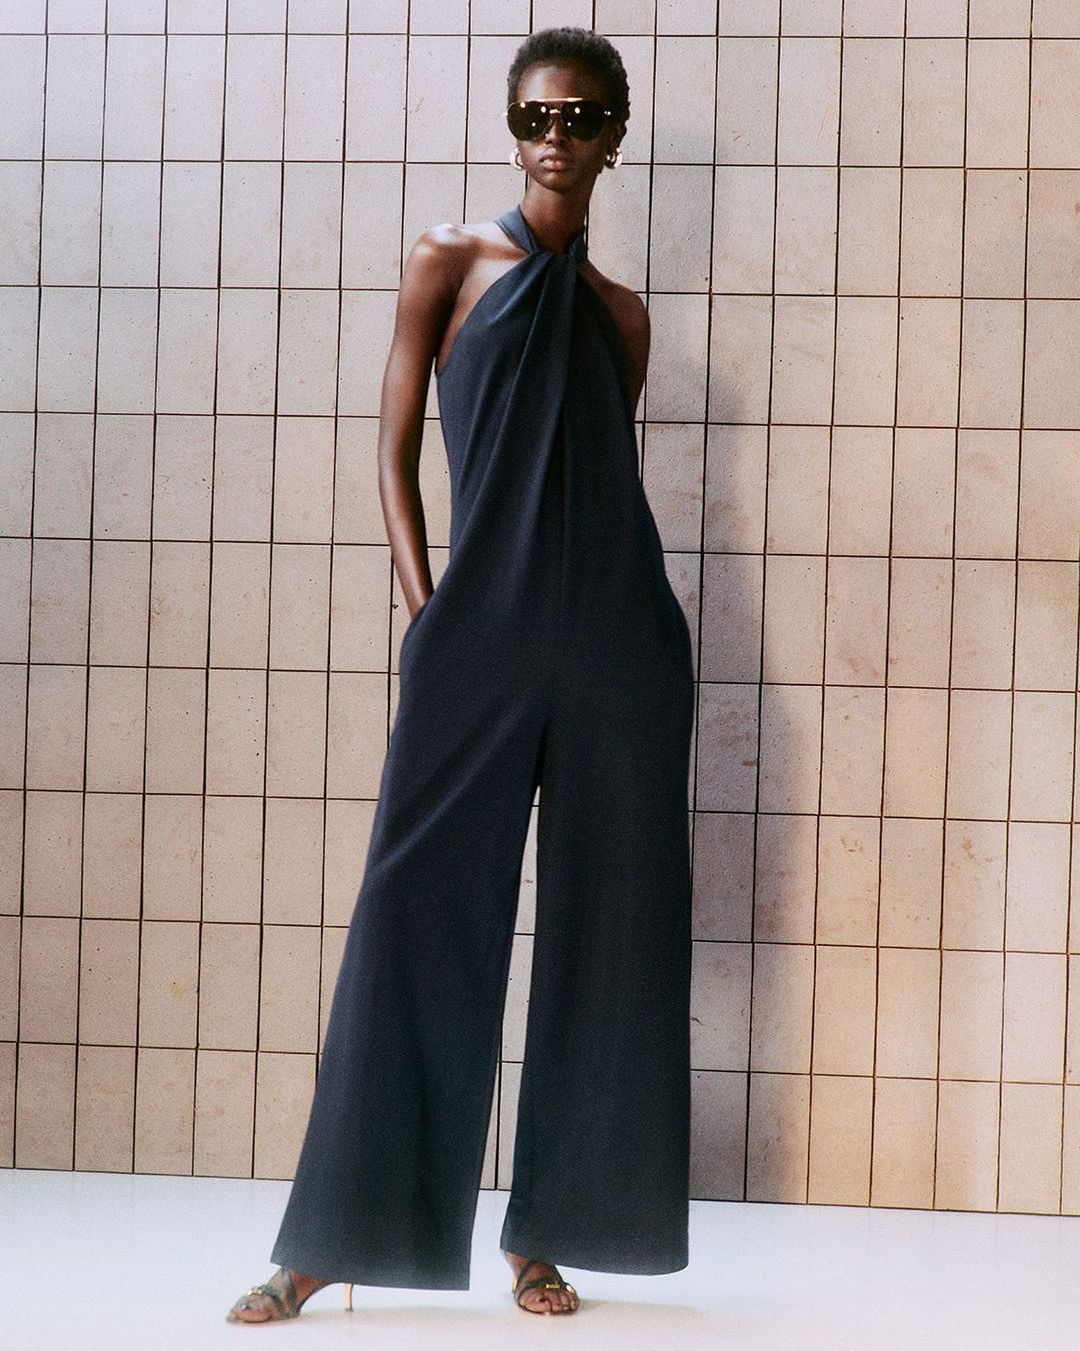 Image of a model wearing a black jumpsuit with wide legs and a halter top